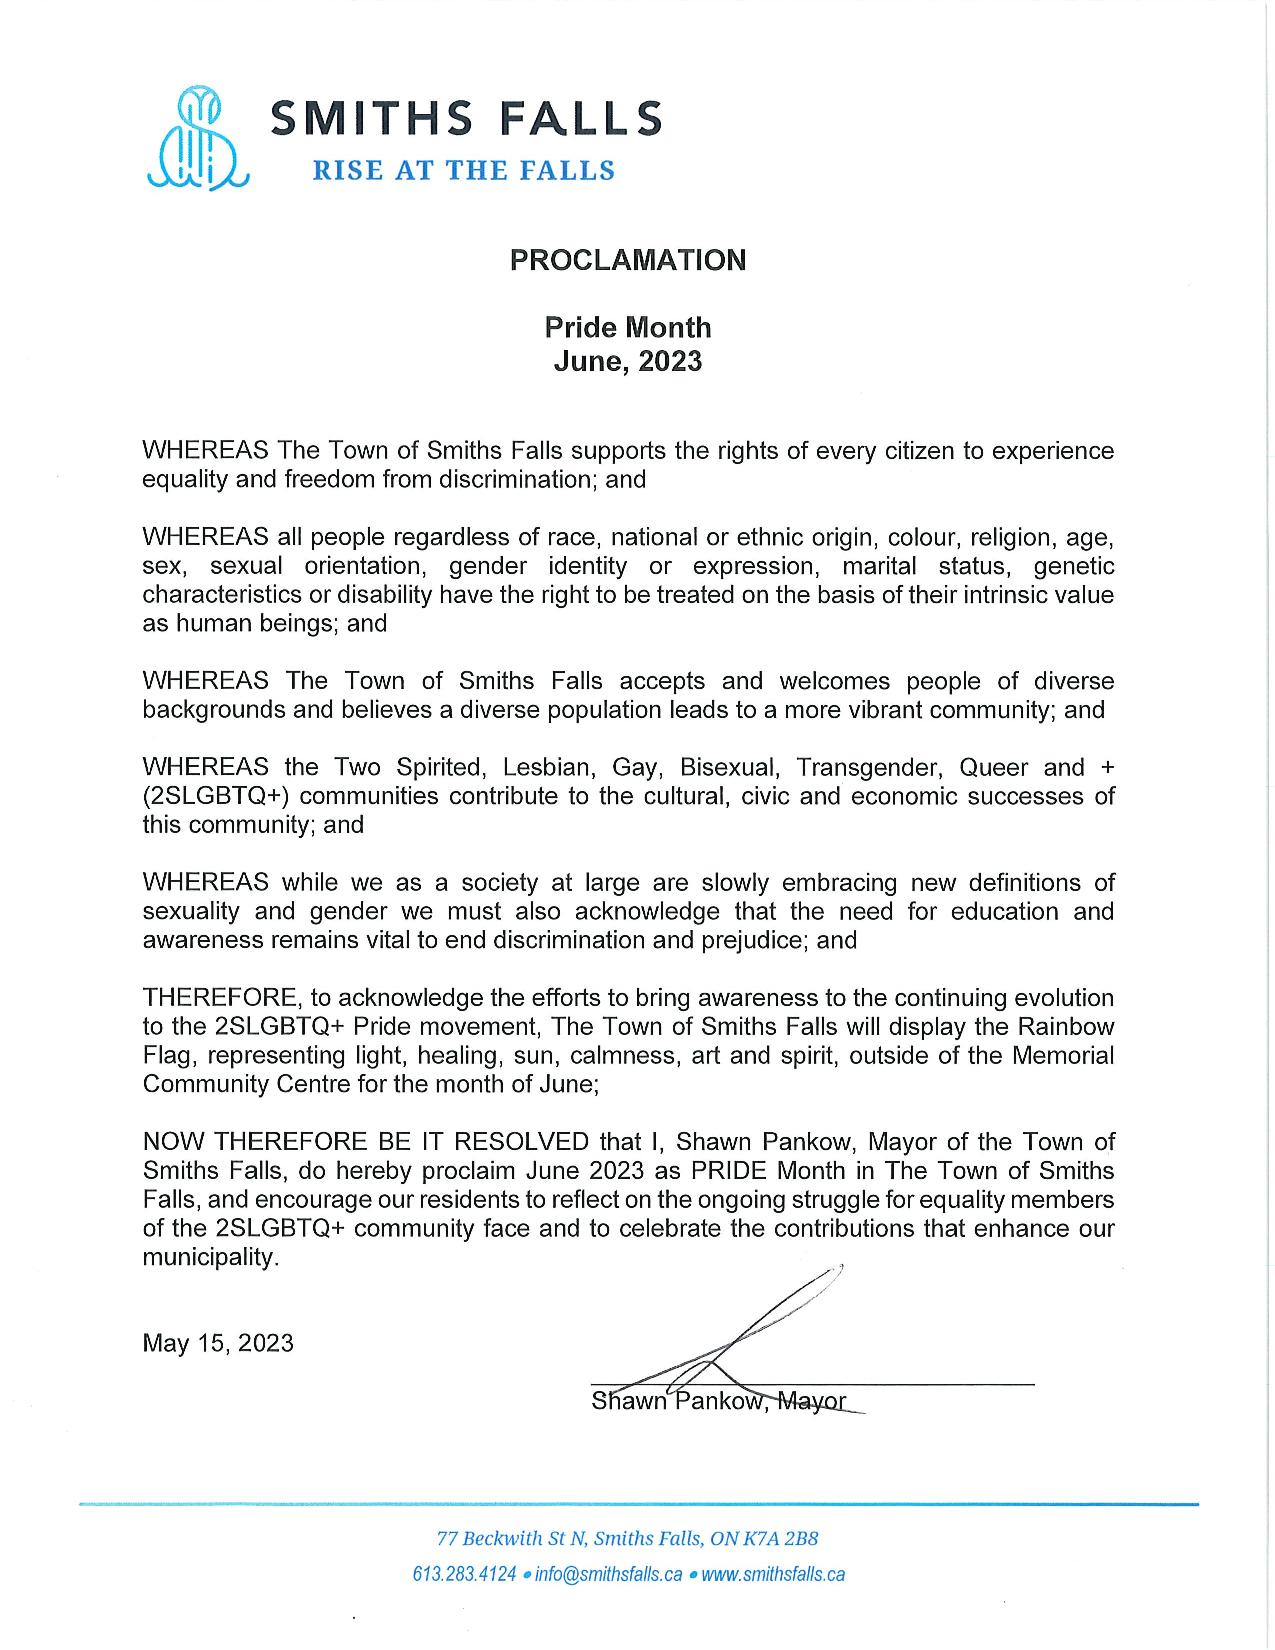 Mayor's proclamation of pride month